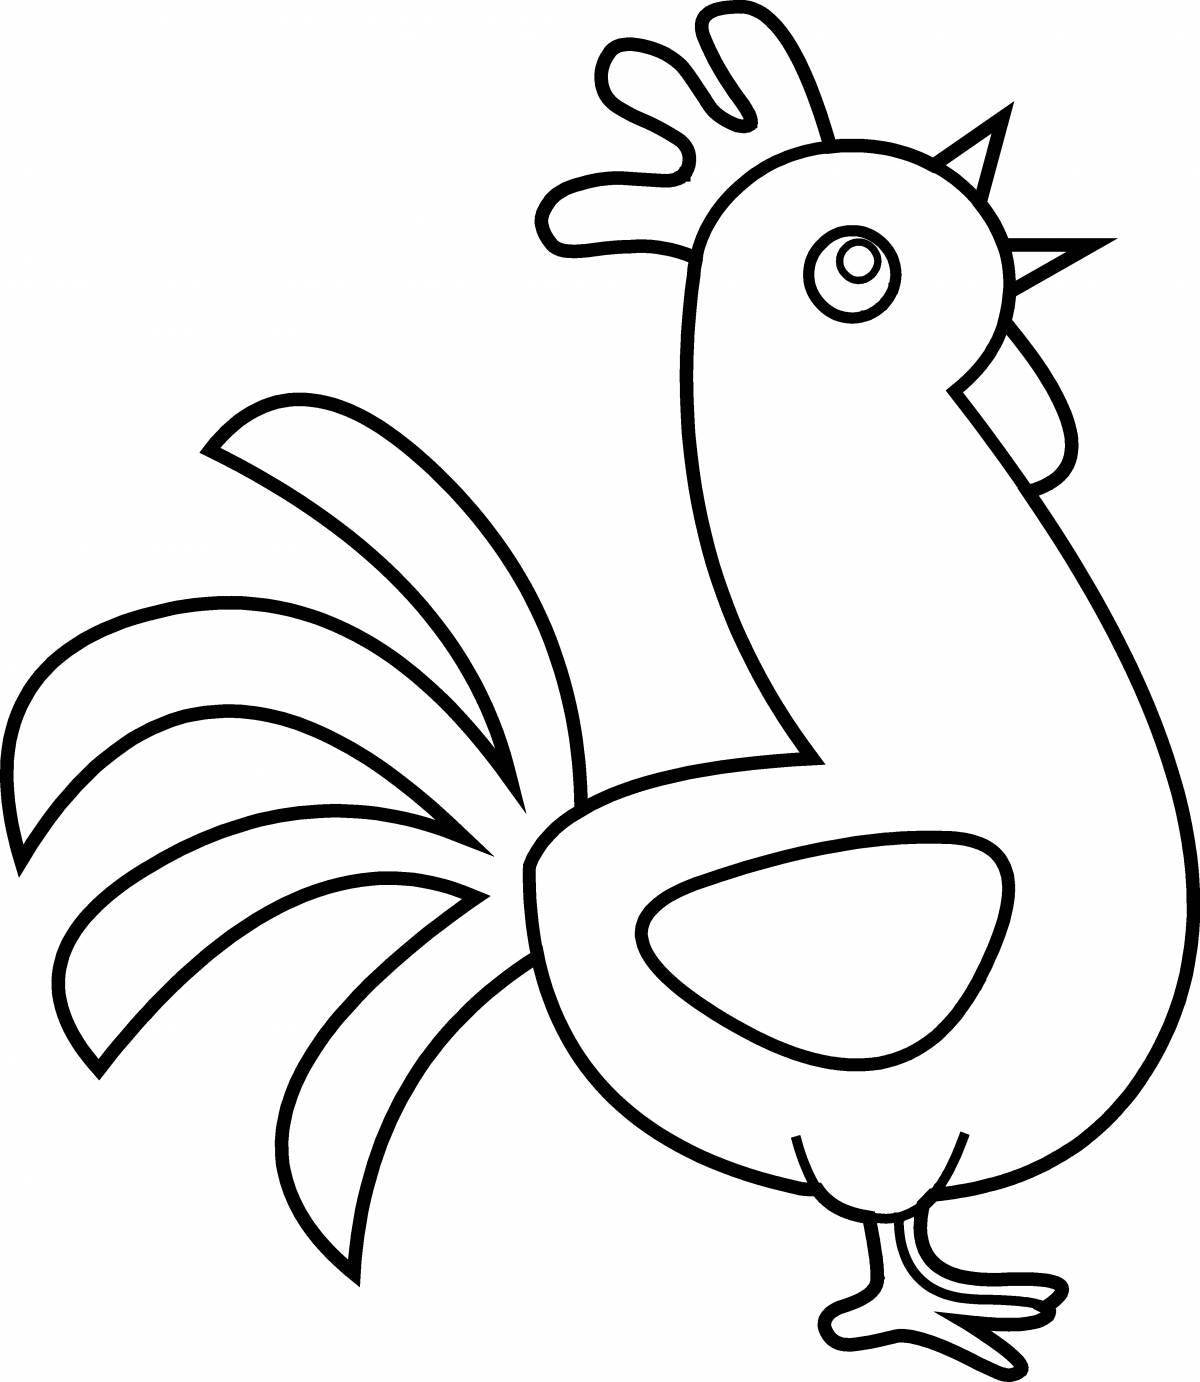 Colouring dazzling rooster for kids